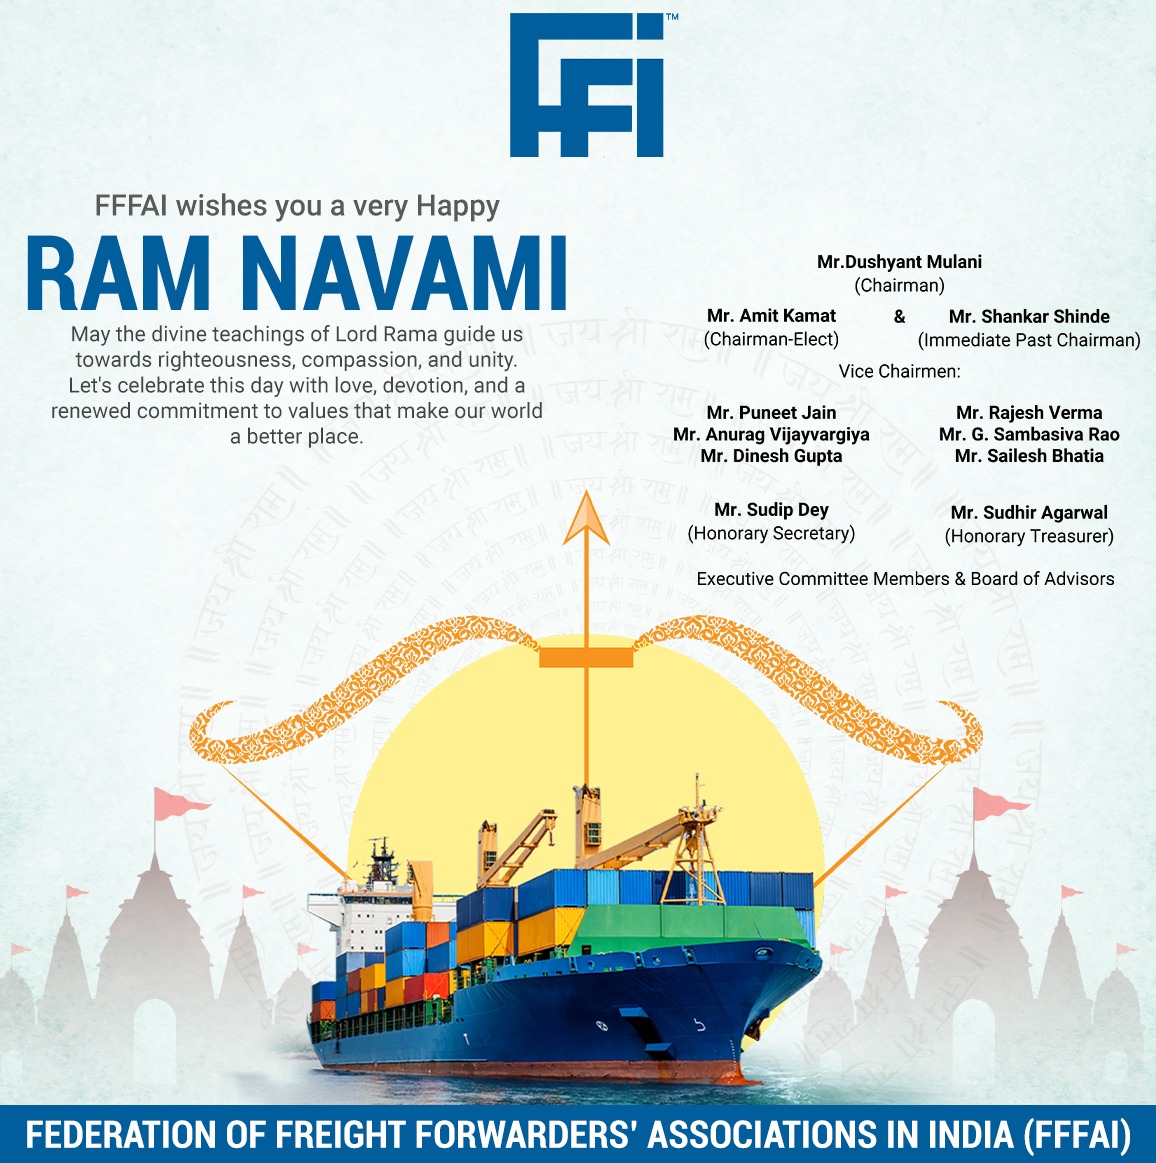 May the divine teachings of Lord Rama guide us towards righteousness, compassion, and unity. Let's celebrate this day with love, devotion, and a renewed commitment to values that make our world a better place. 

#FFFAI wishes you a very #HappyRamNavami!

#RamNavami #Navami